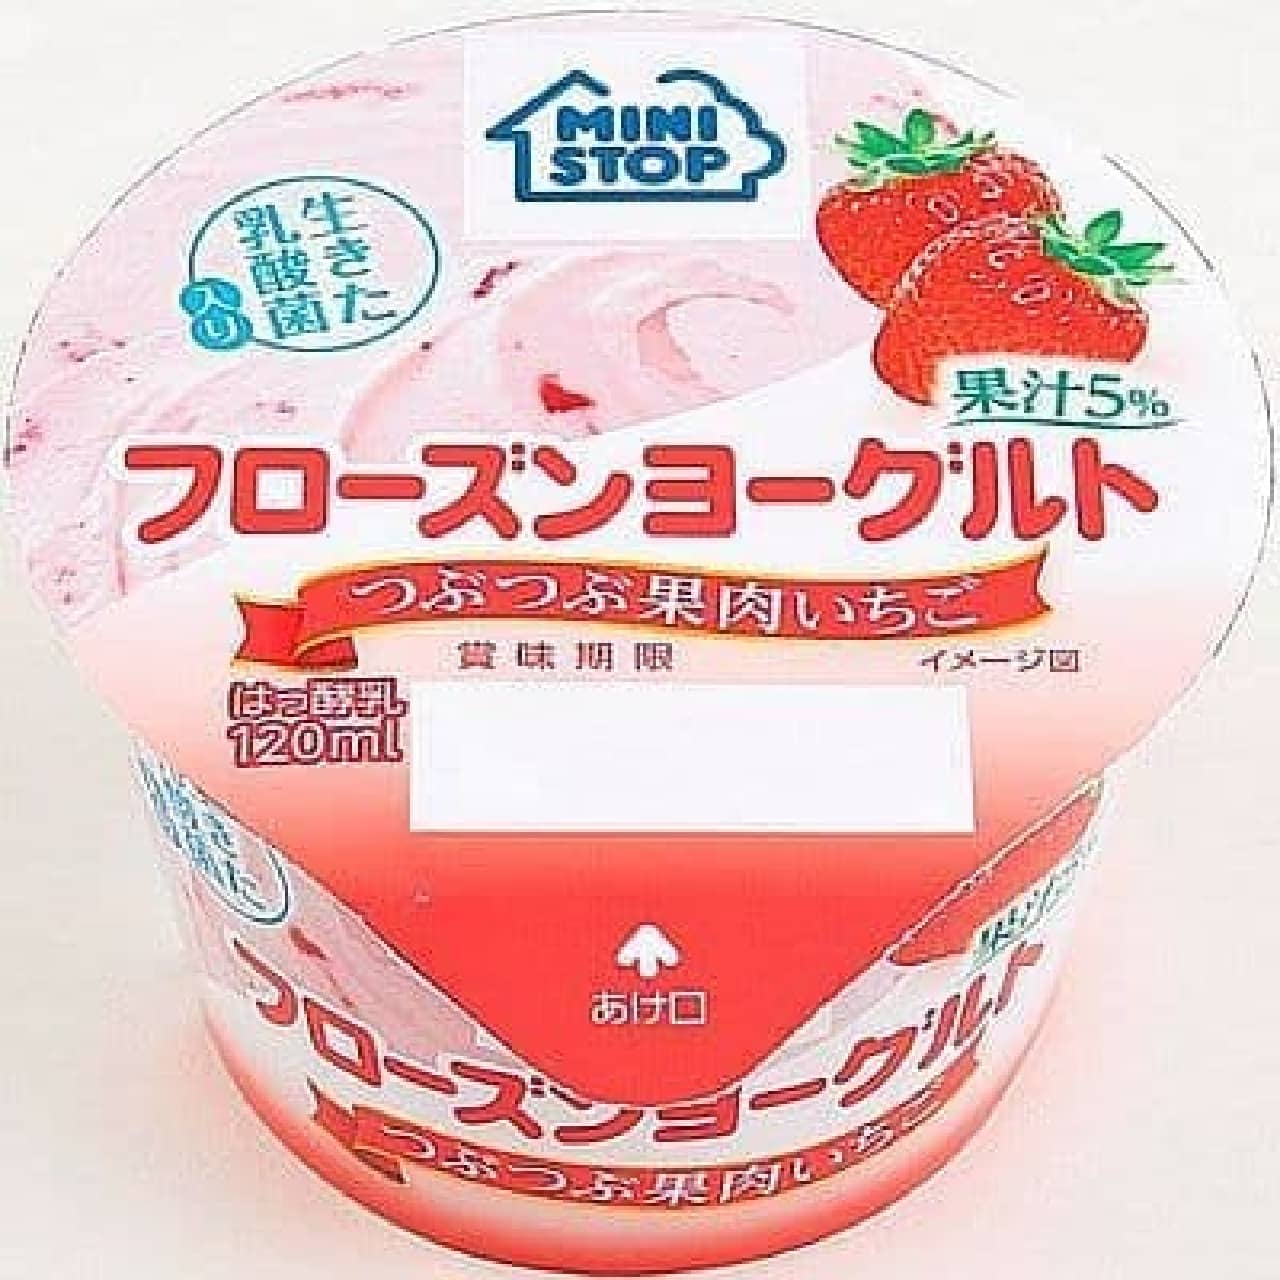 Everyone's favorite "strawberry flavor" has come out!